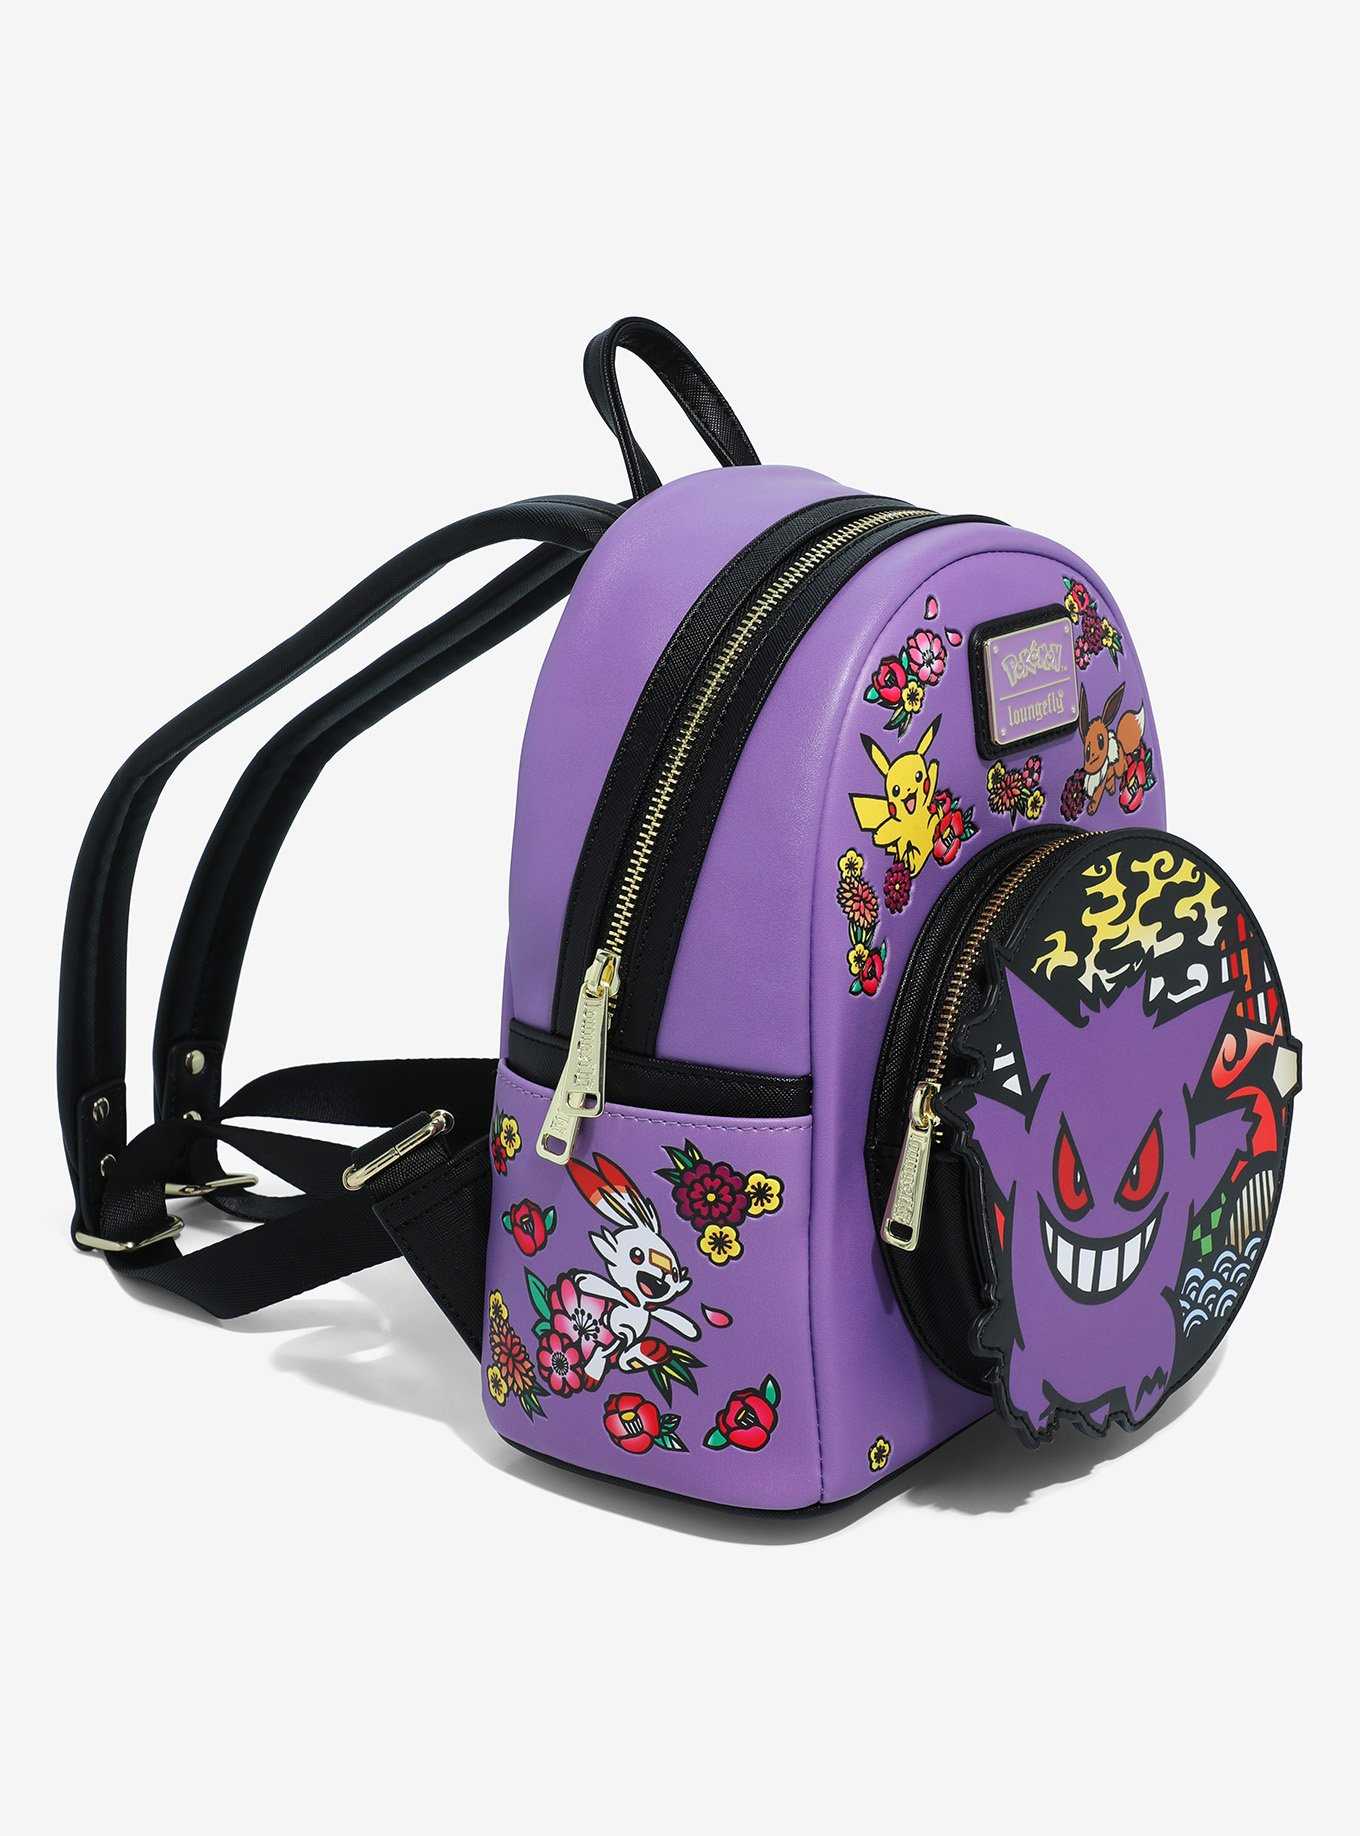 Loungefly Pokémon Pikachu & Eevee Floral Mini Backpack - BoxLunch Exclusive